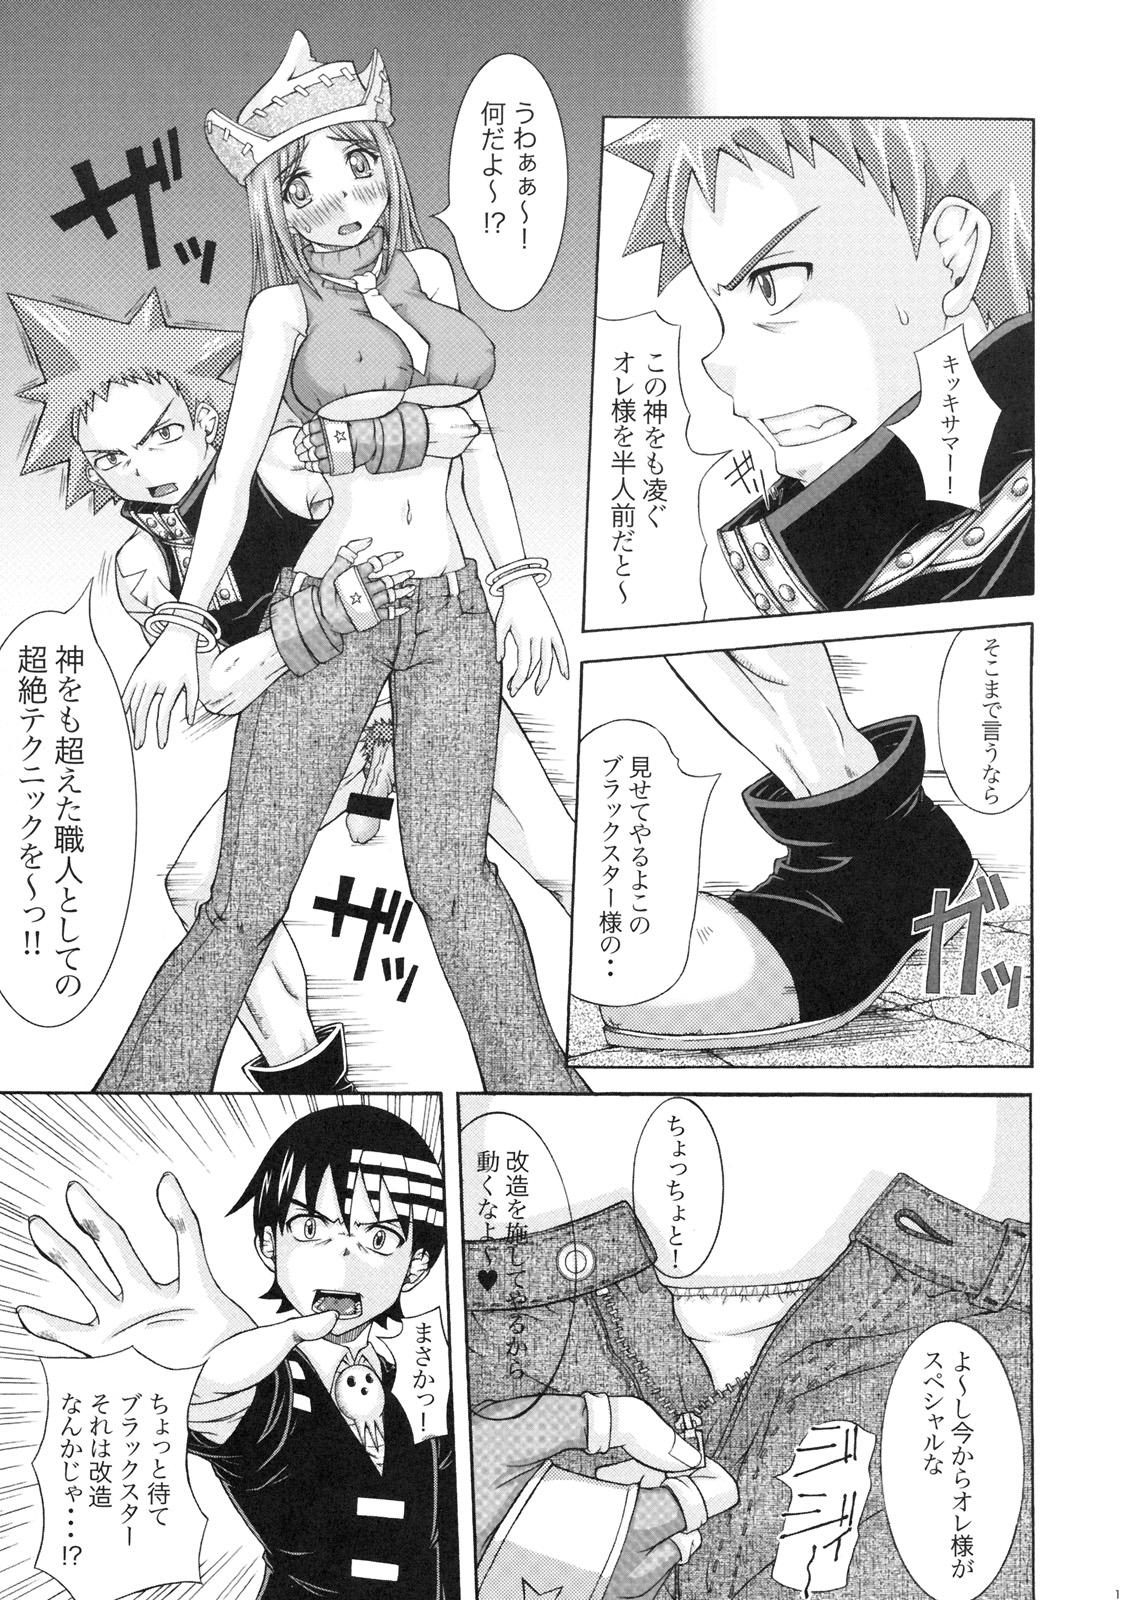 Pussyeating RABI×2 3rd - Queens blade Soul eater Spoon - Page 10